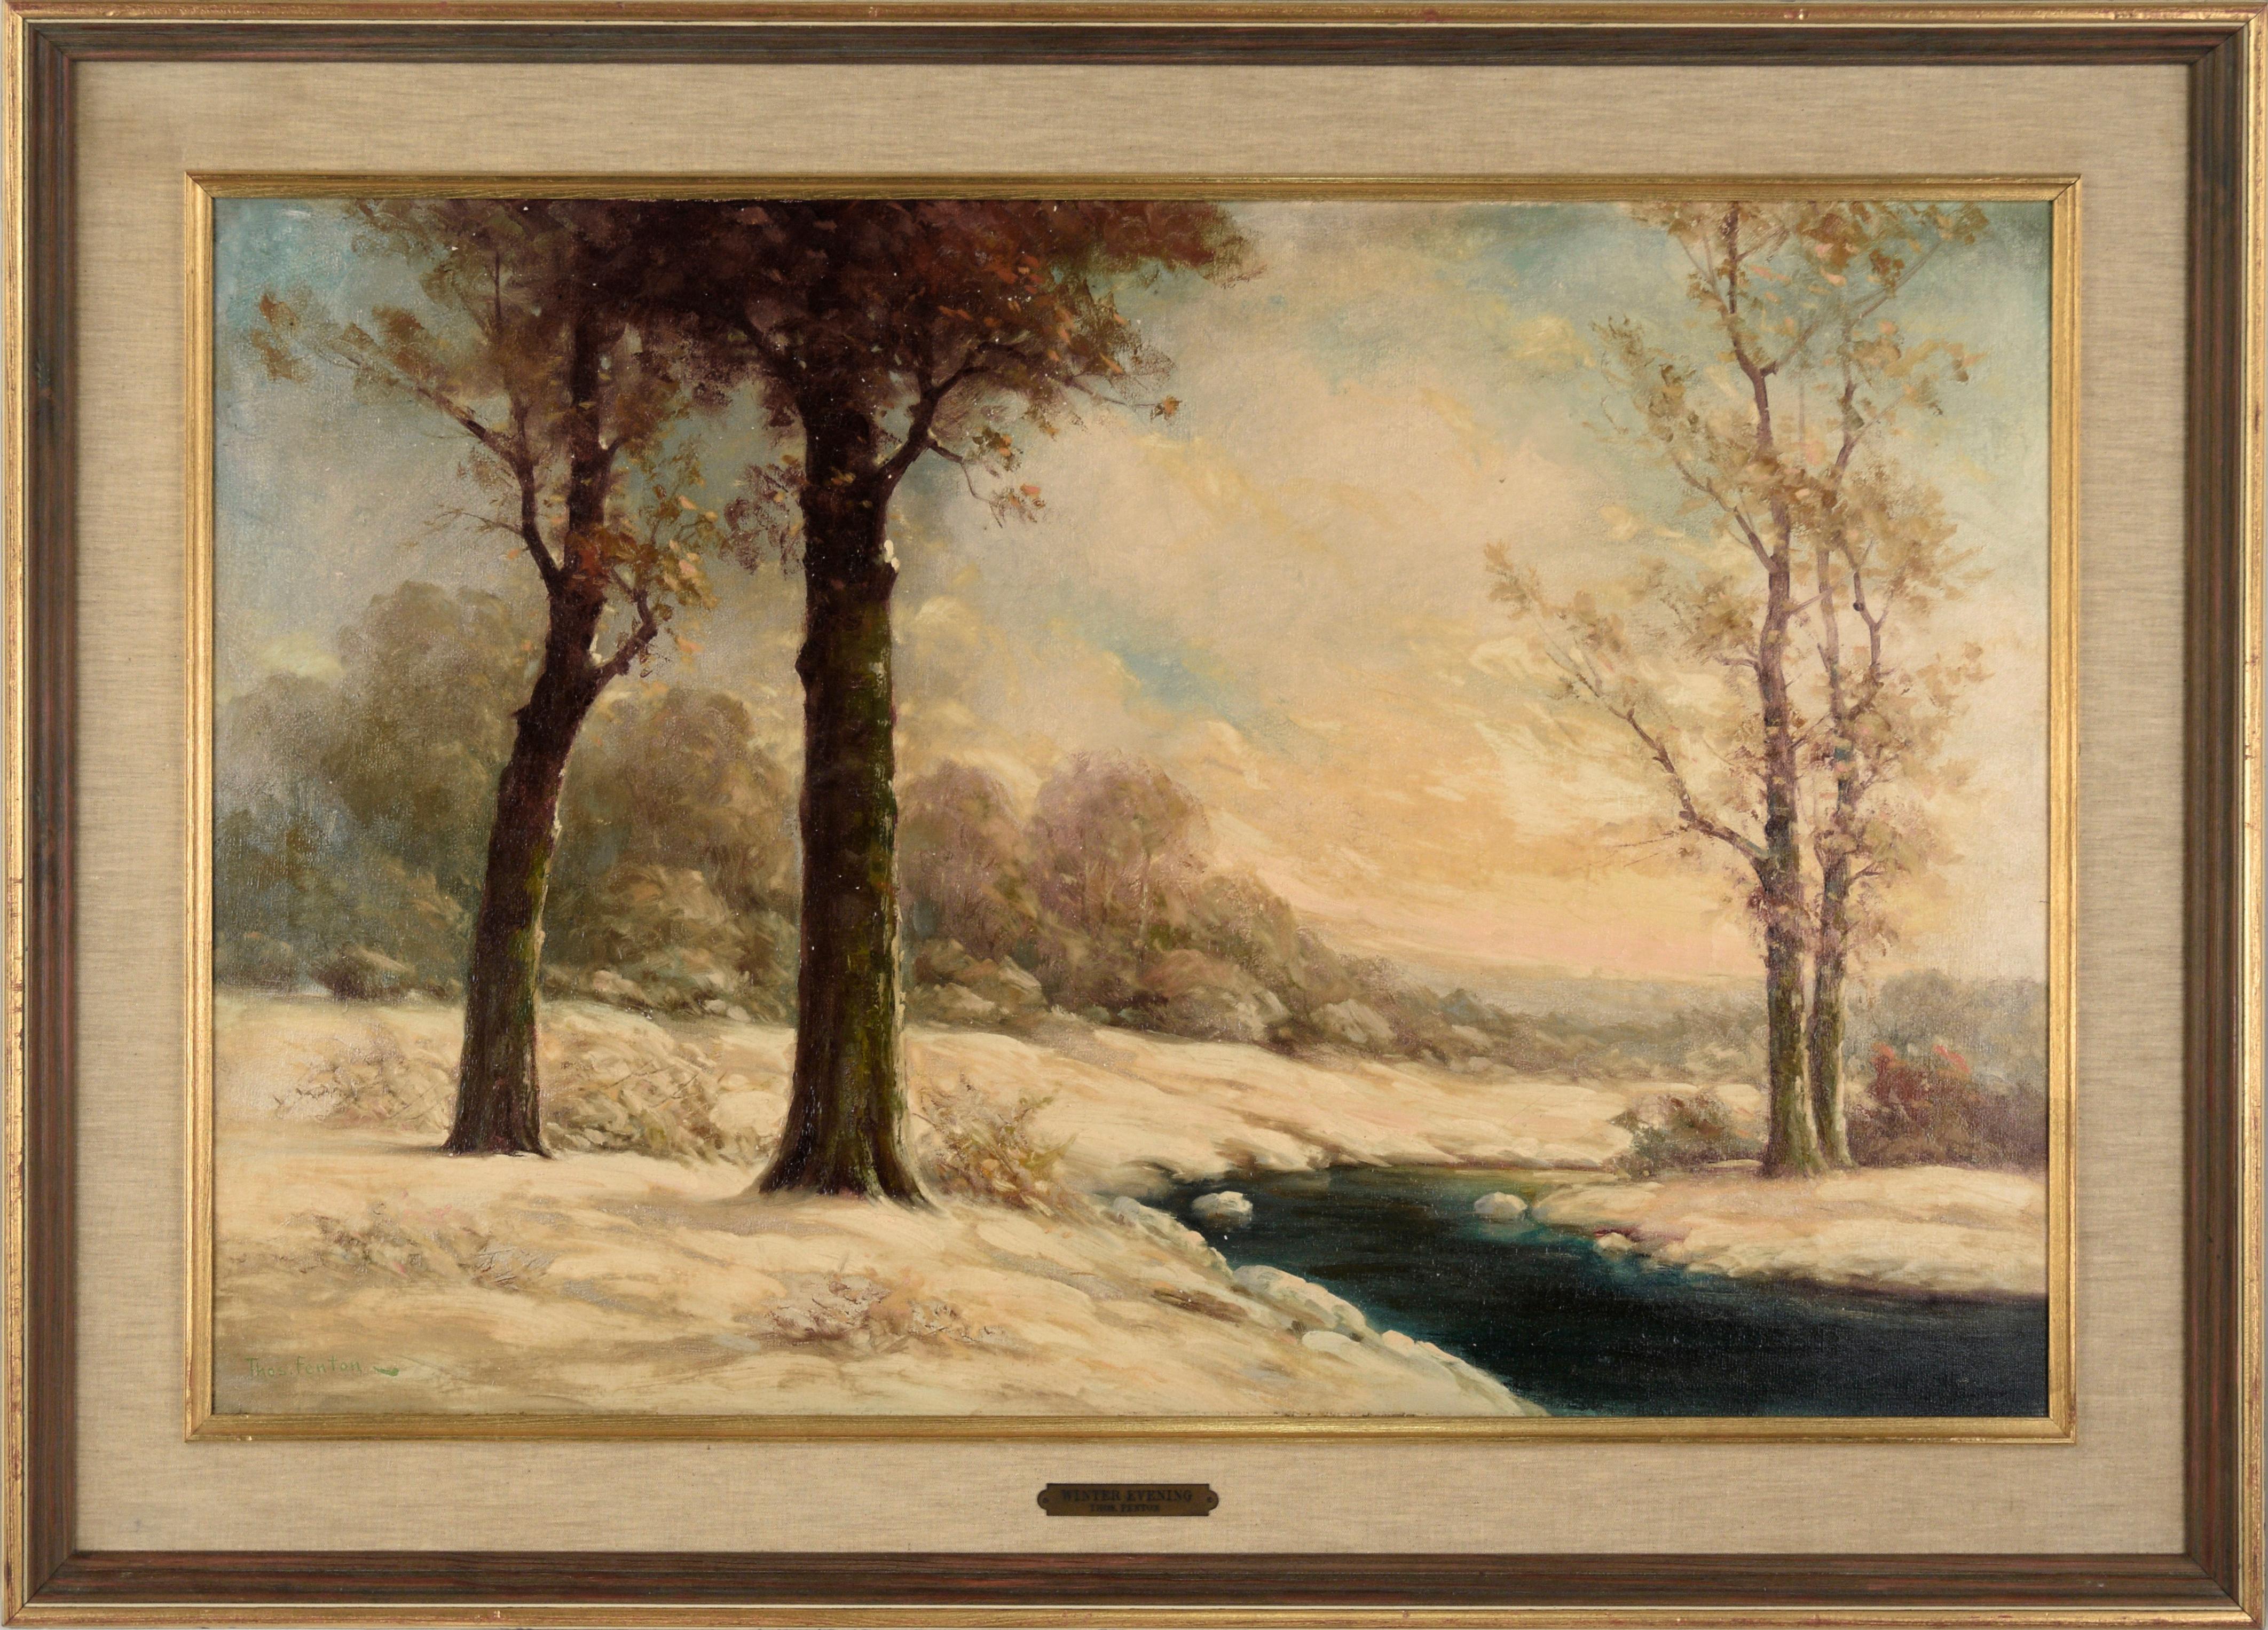 Thomas Fenton Landscape Painting - "One Winter Evening" Northwest in Winter Snow and Stream - Oil on Linen